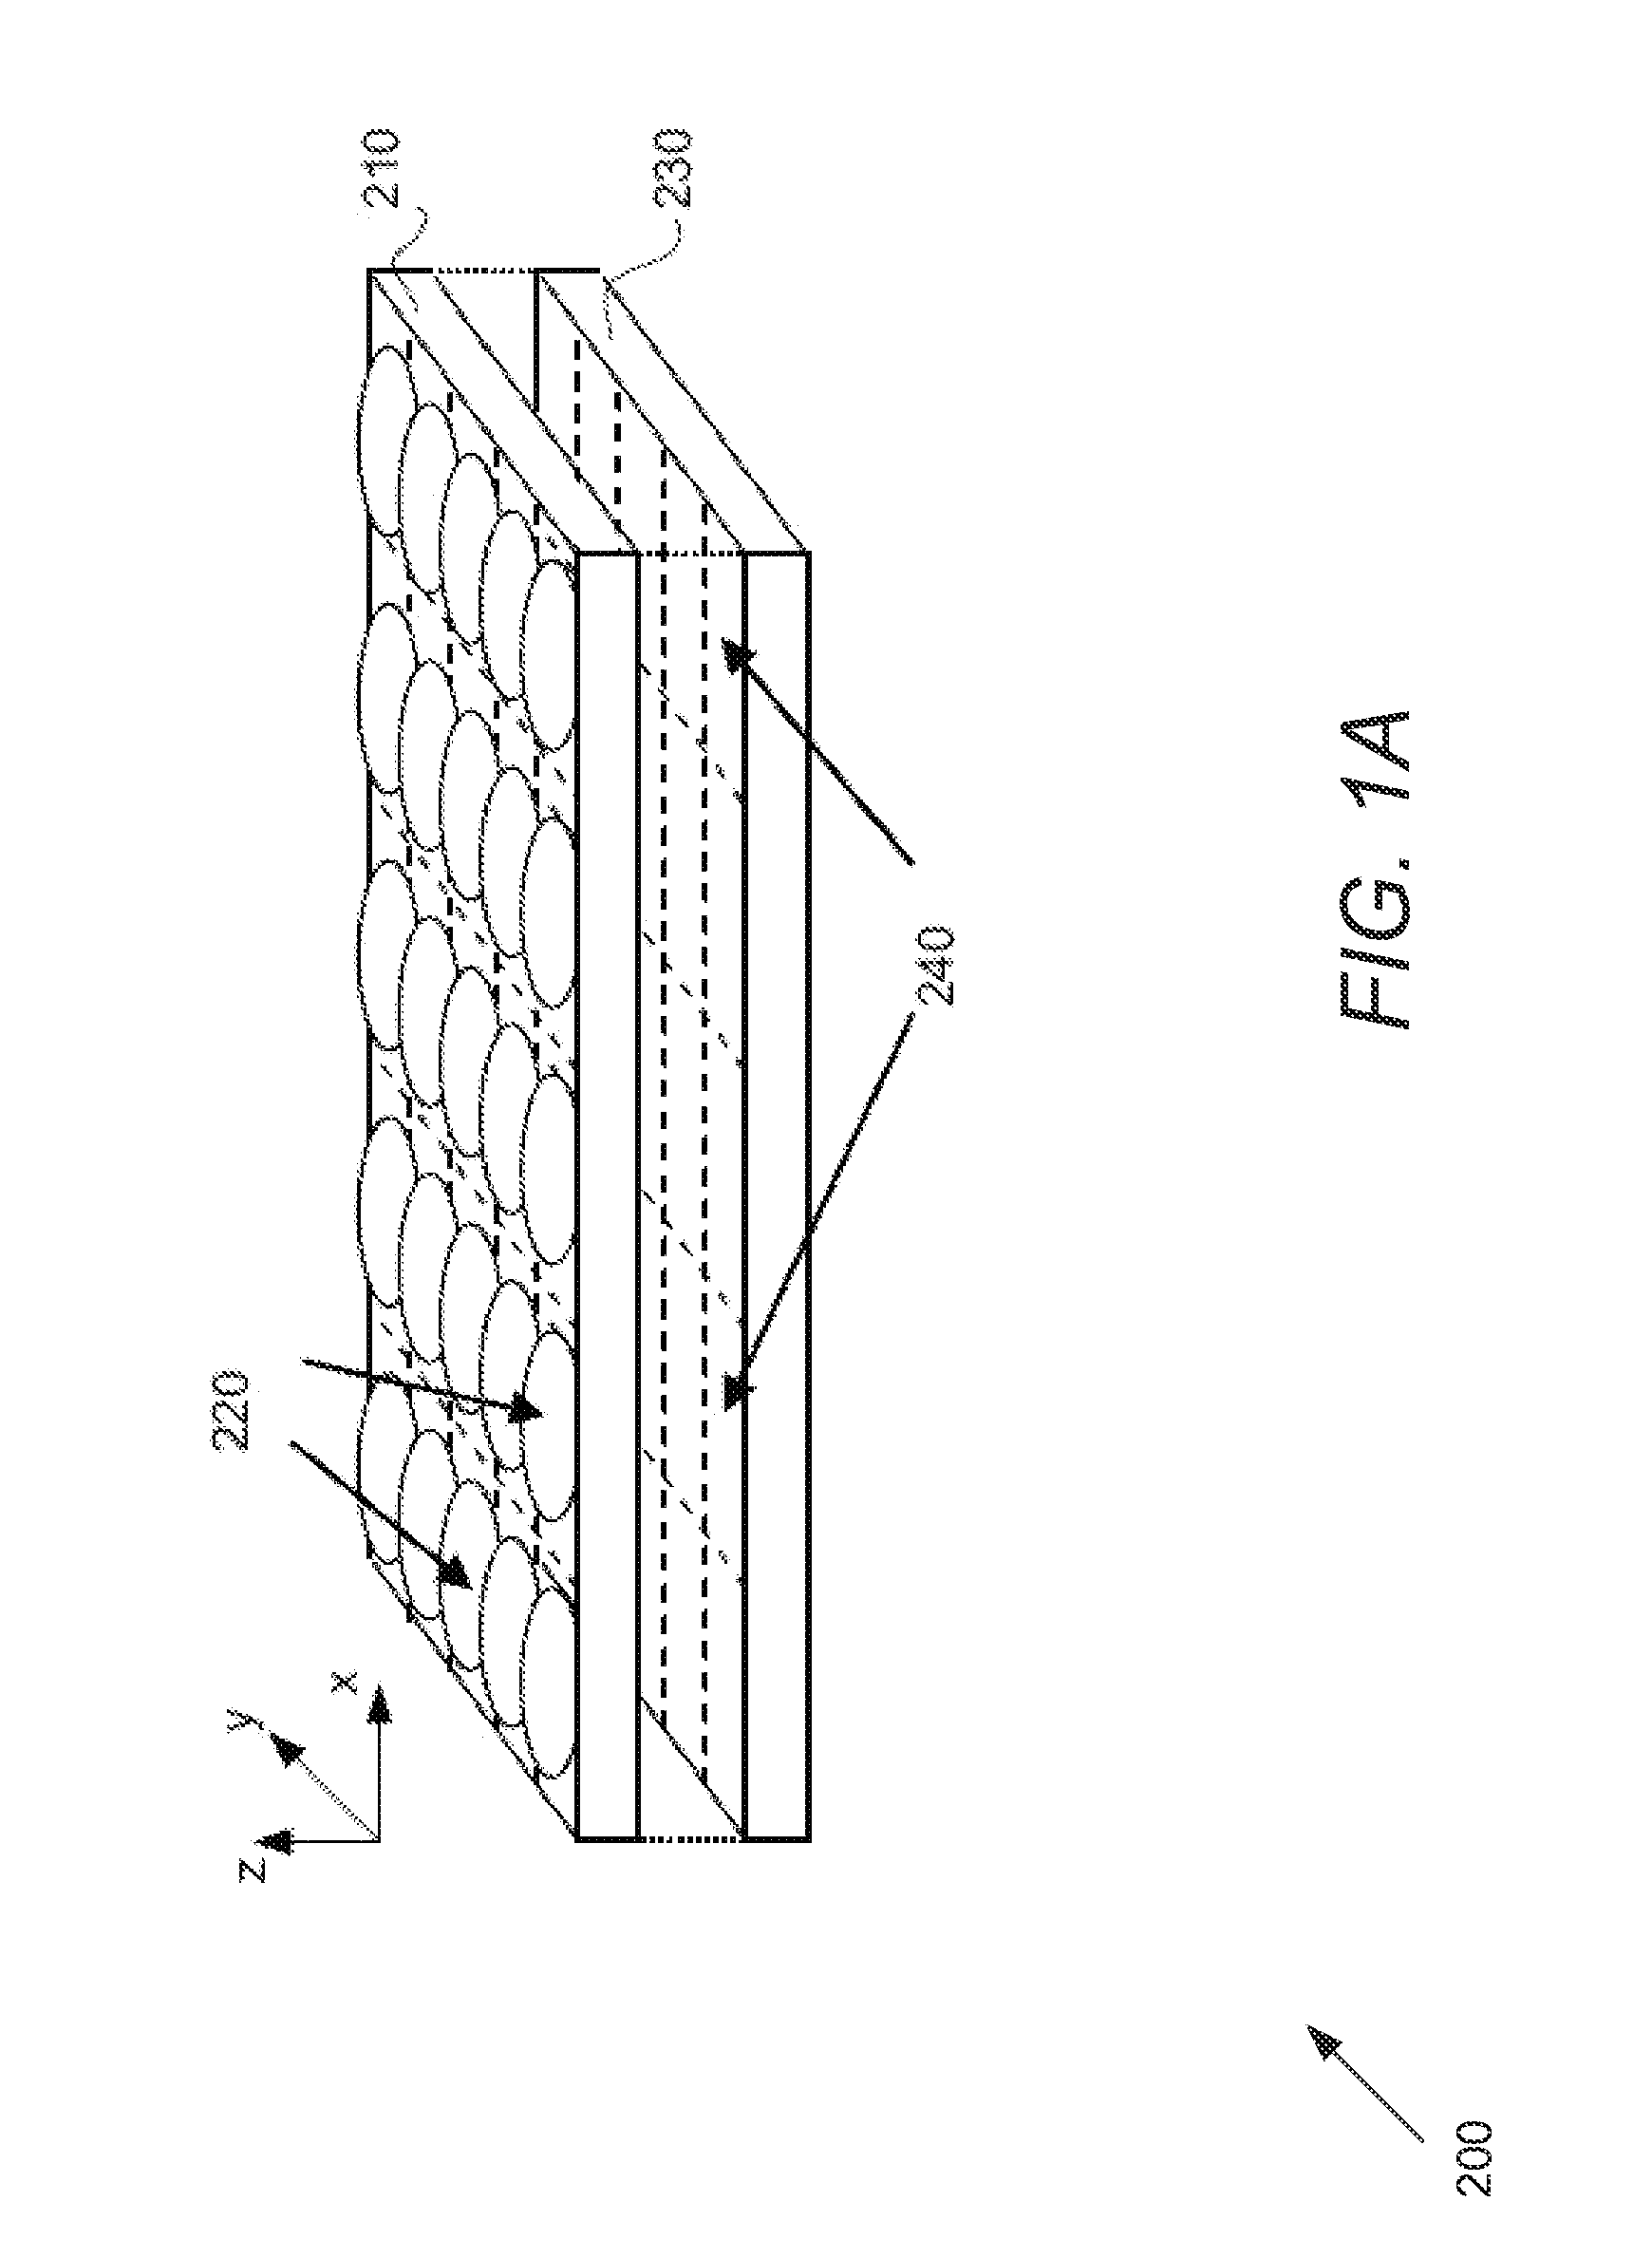 Systems and methods for reducing motion blur in images or video in ultra low light with array cameras